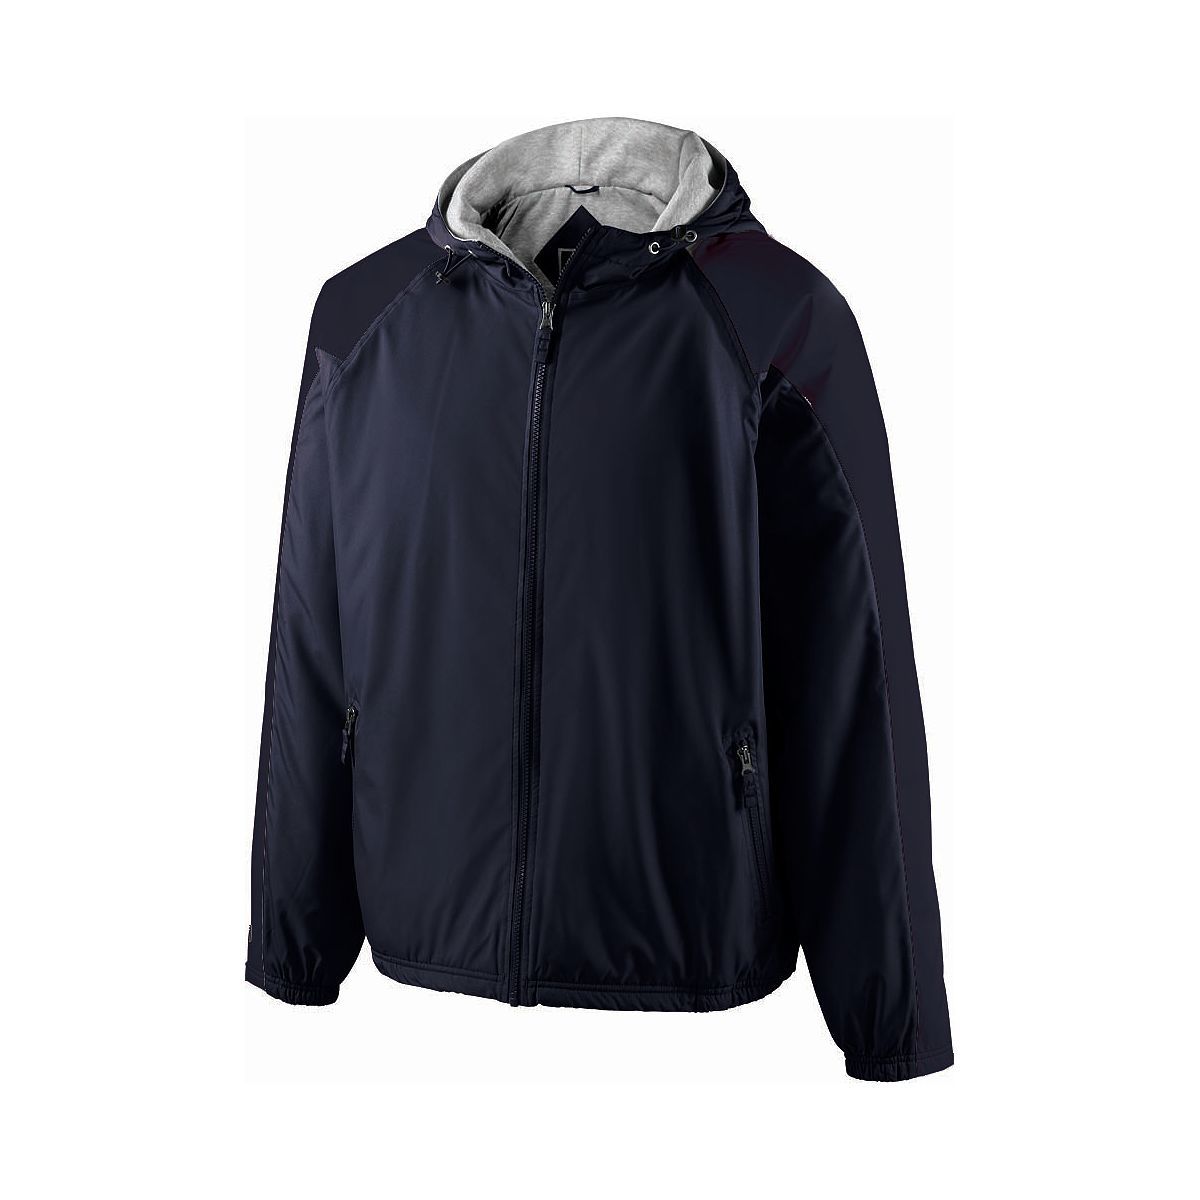 Holloway Homefield Jacket in Navy/Navy  -Part of the Adult, Adult-Jacket, Holloway, Outerwear product lines at KanaleyCreations.com